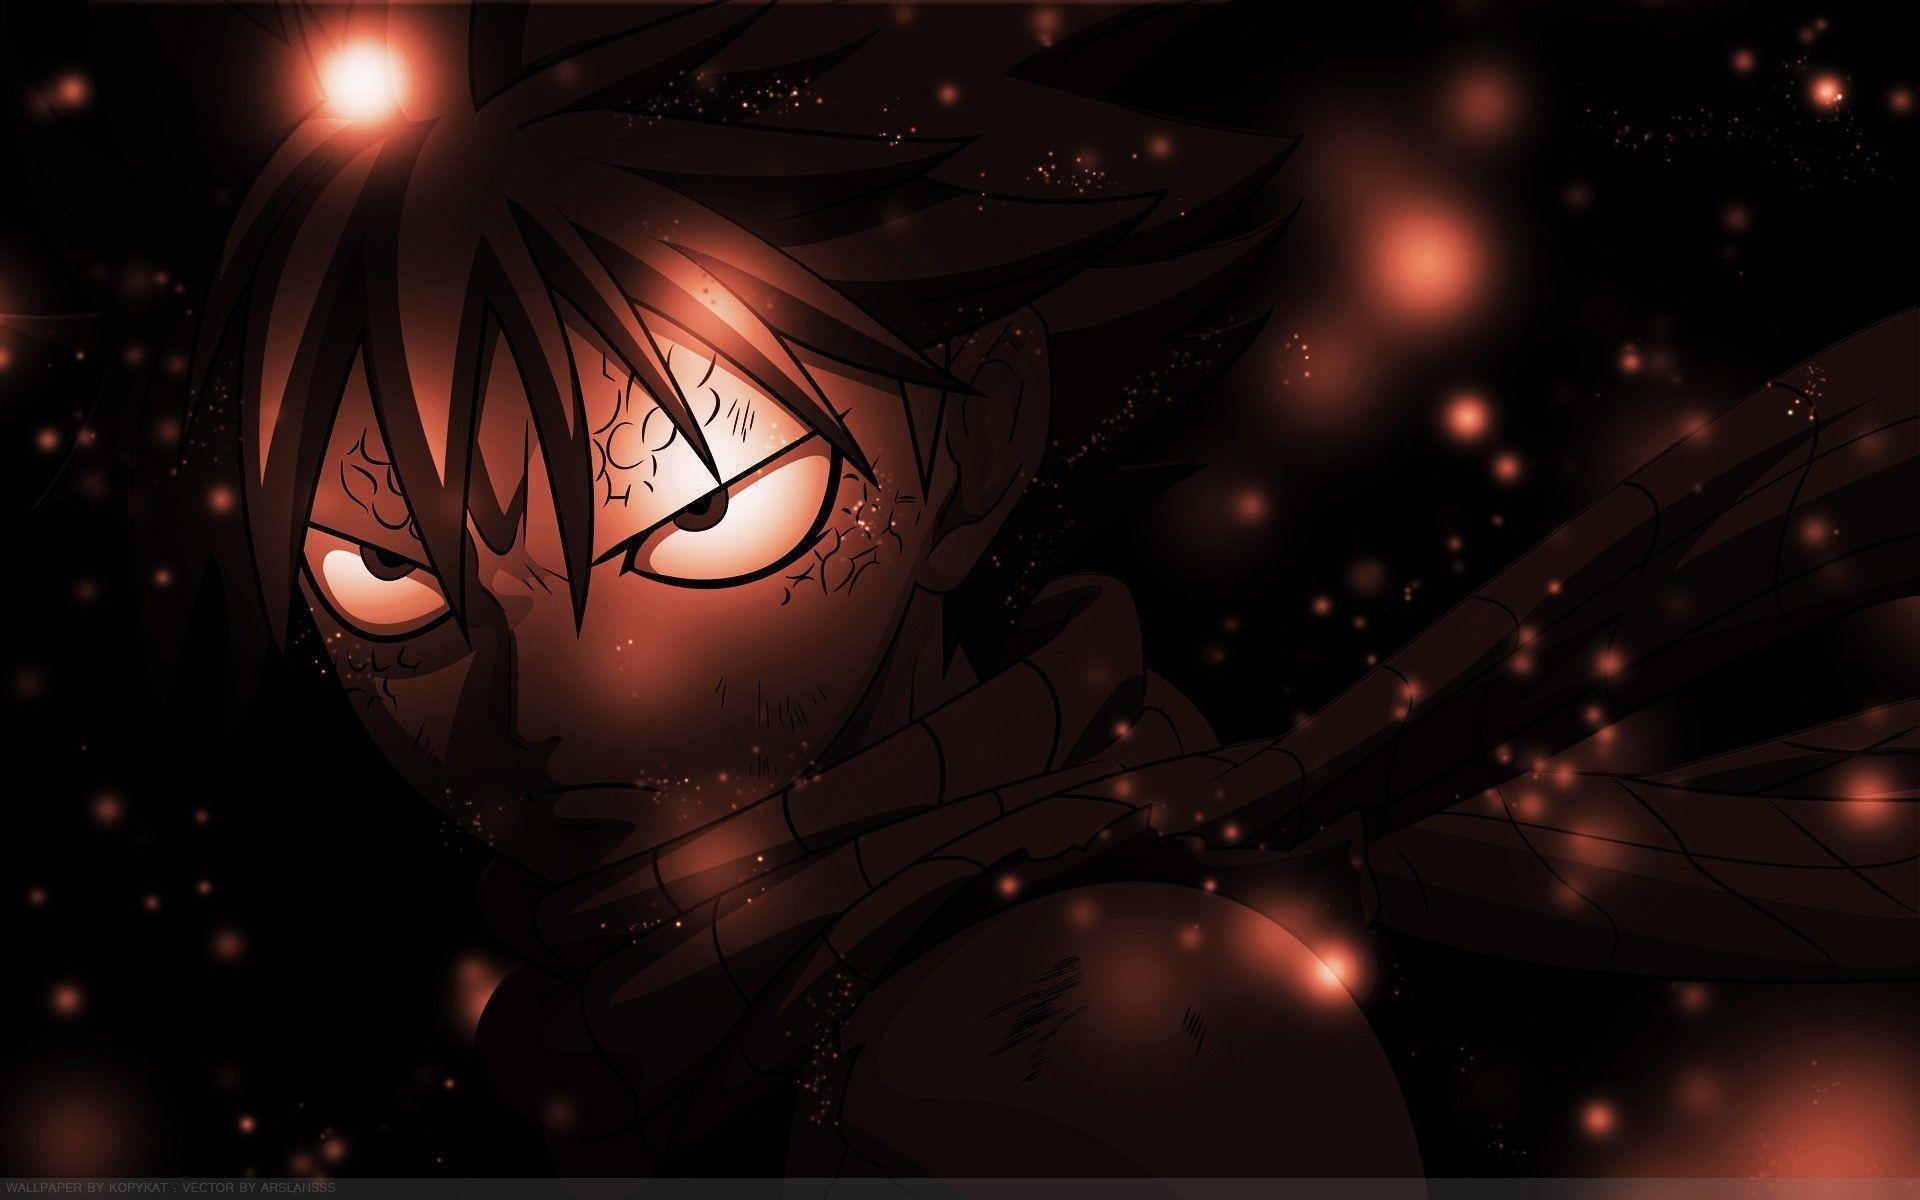 Fairy Tail Computer Wallpapers, Desktop Backgrounds 1920x1200 Id